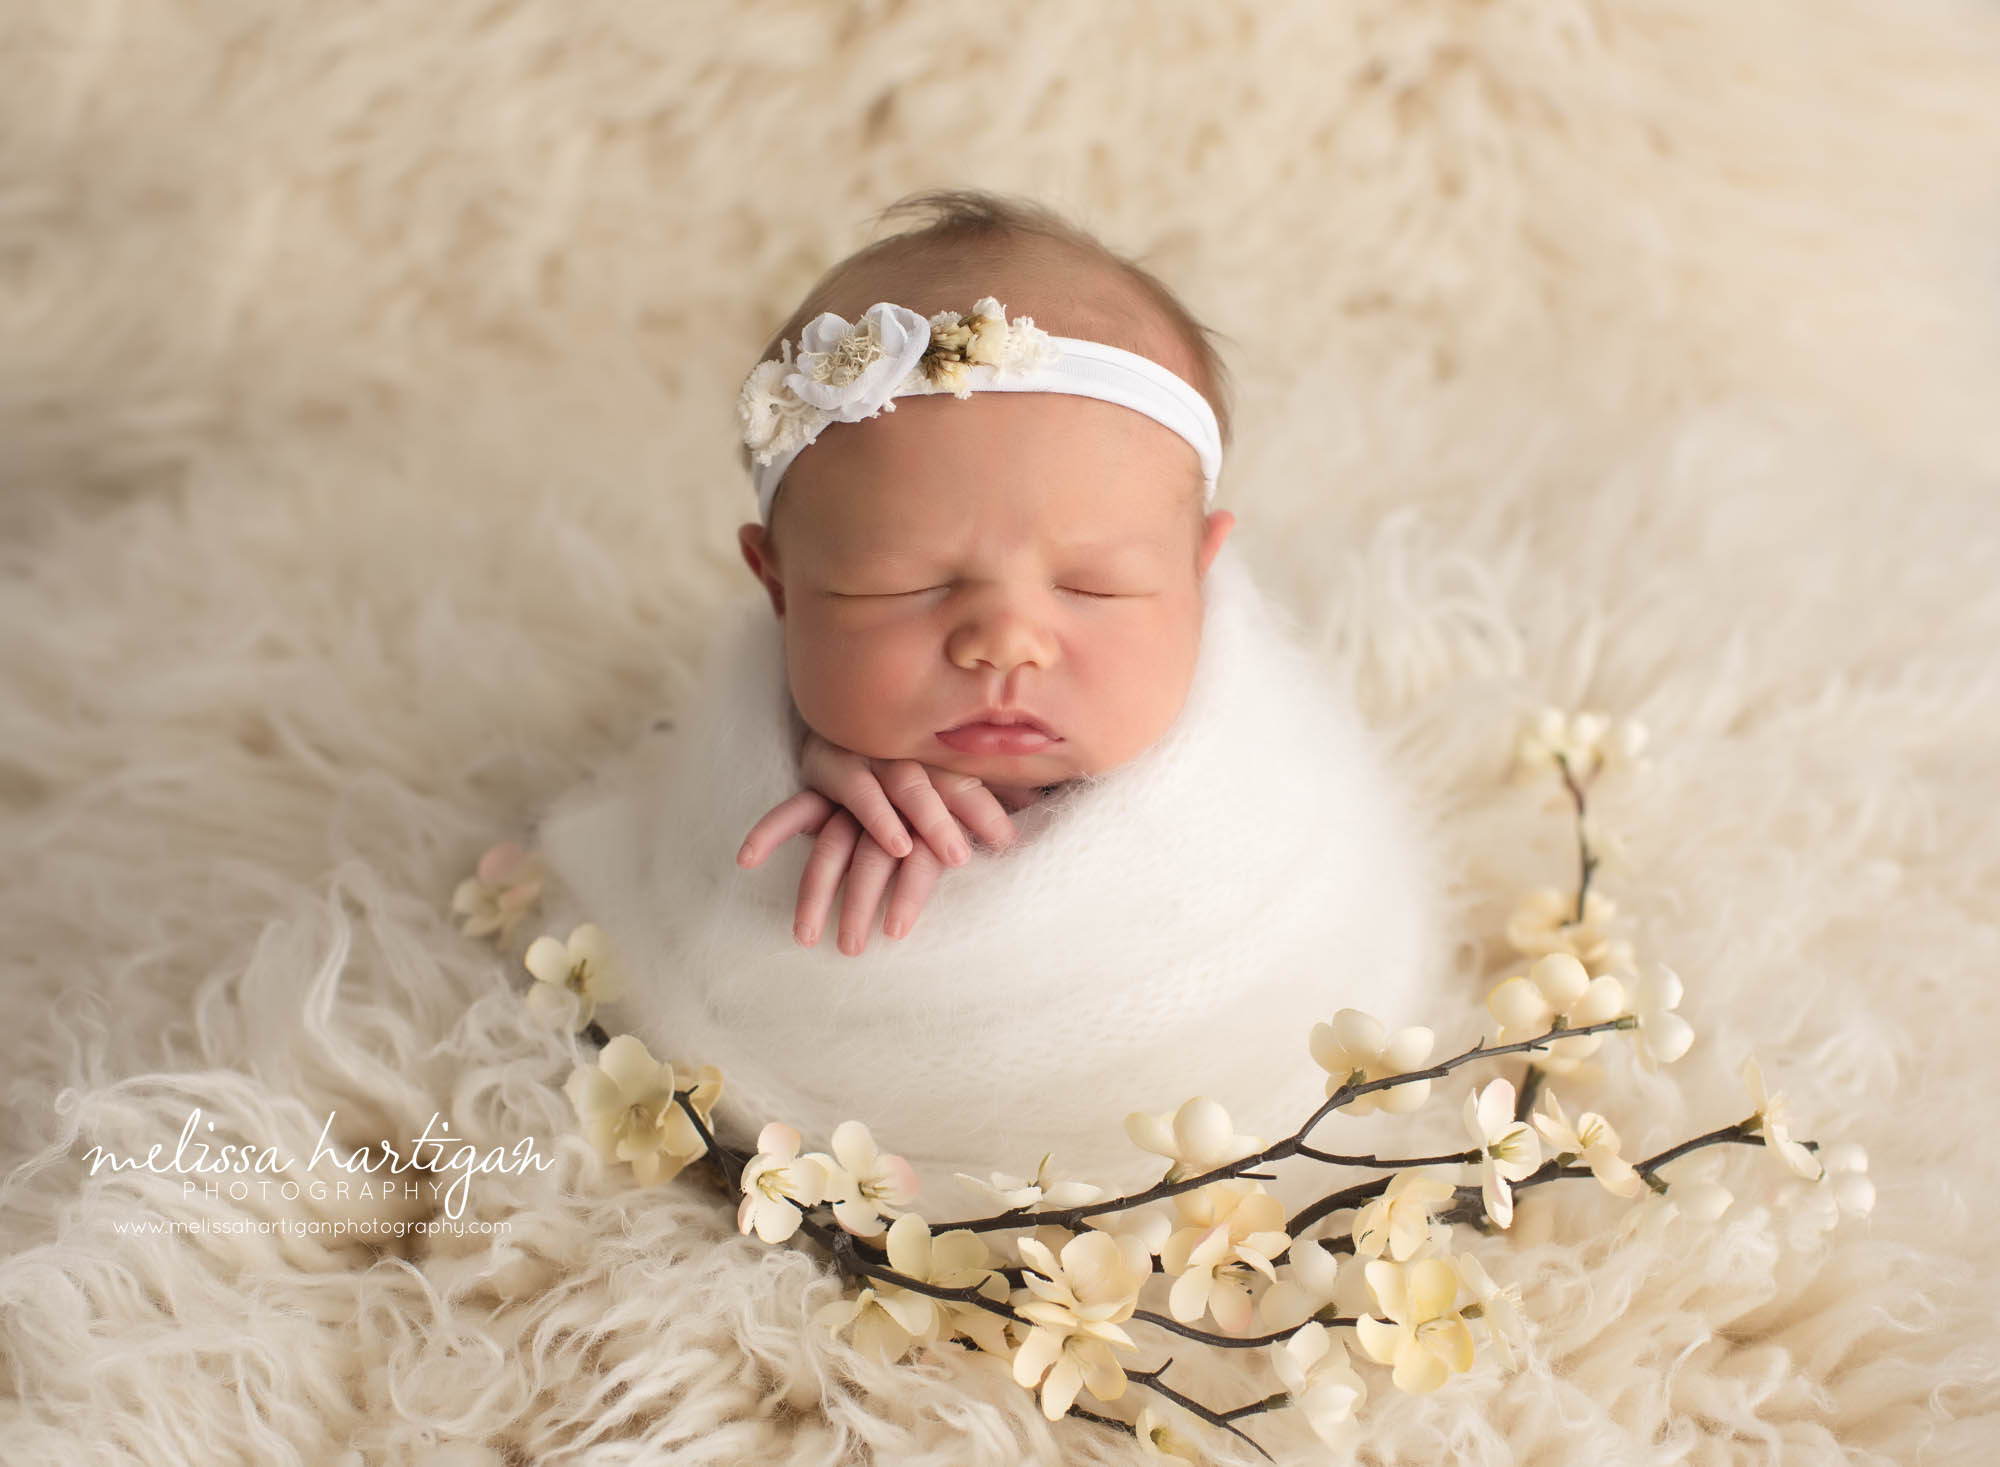 Baby girl wrapped in white wrap on flokati with floral headband and branch of flowers